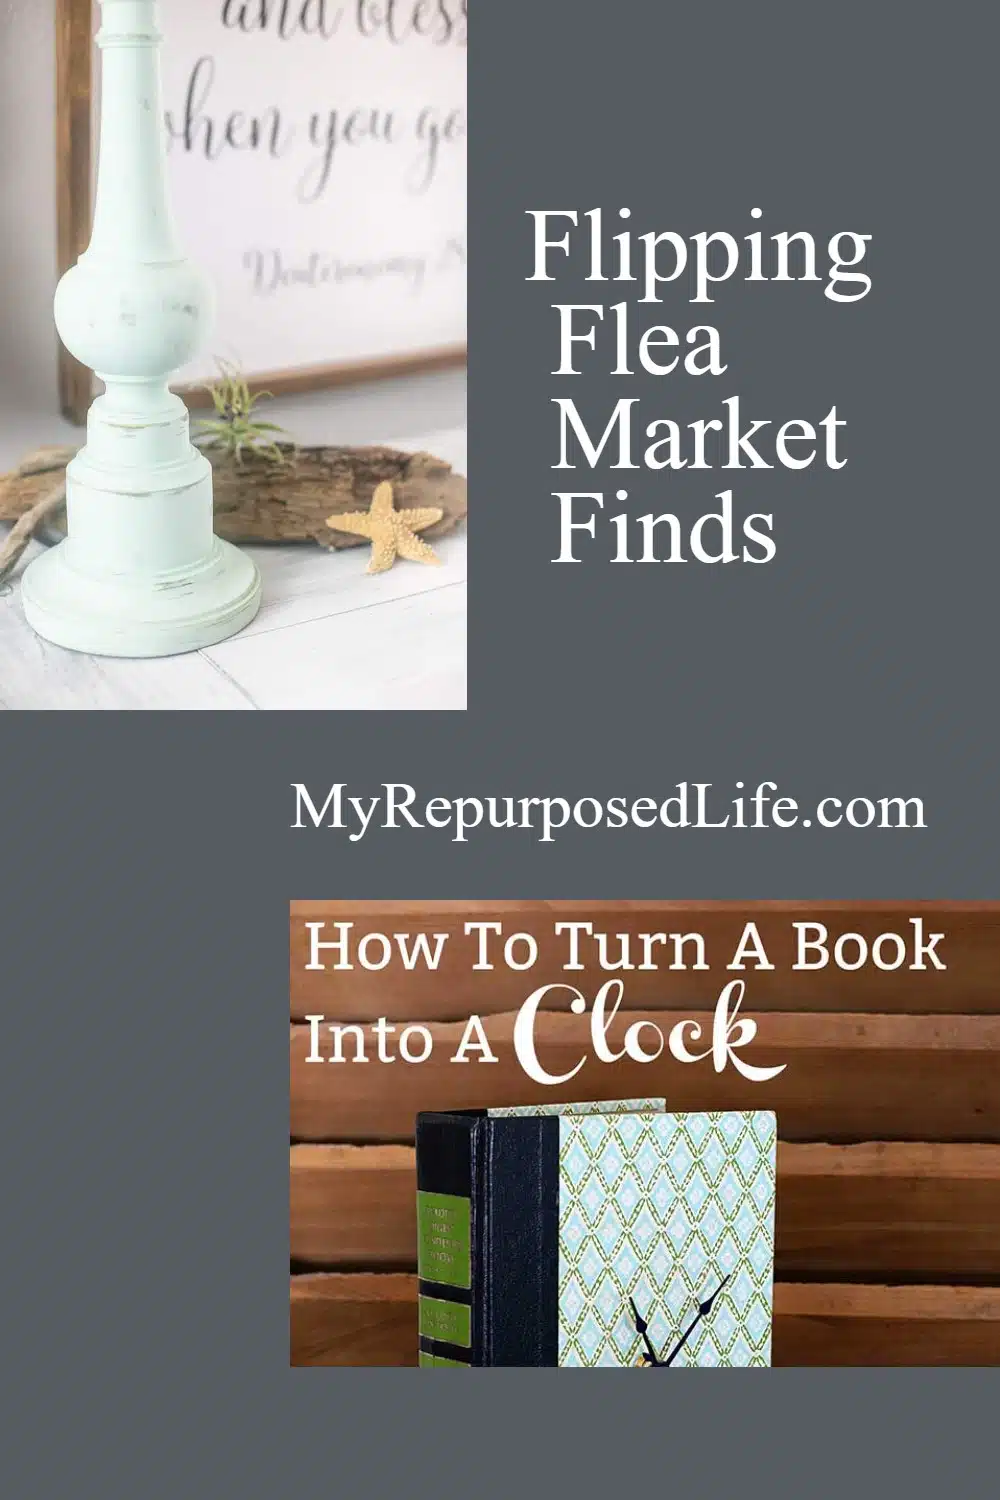 Flipping Flea Market Finds is fun, easy and frugal. Ideas for furniture, home decor and so much more. Easy ideas for completing makeovers in an afternoon. #MyRepurposedLife #fleamarketfinds #flipping via @repurposedlife